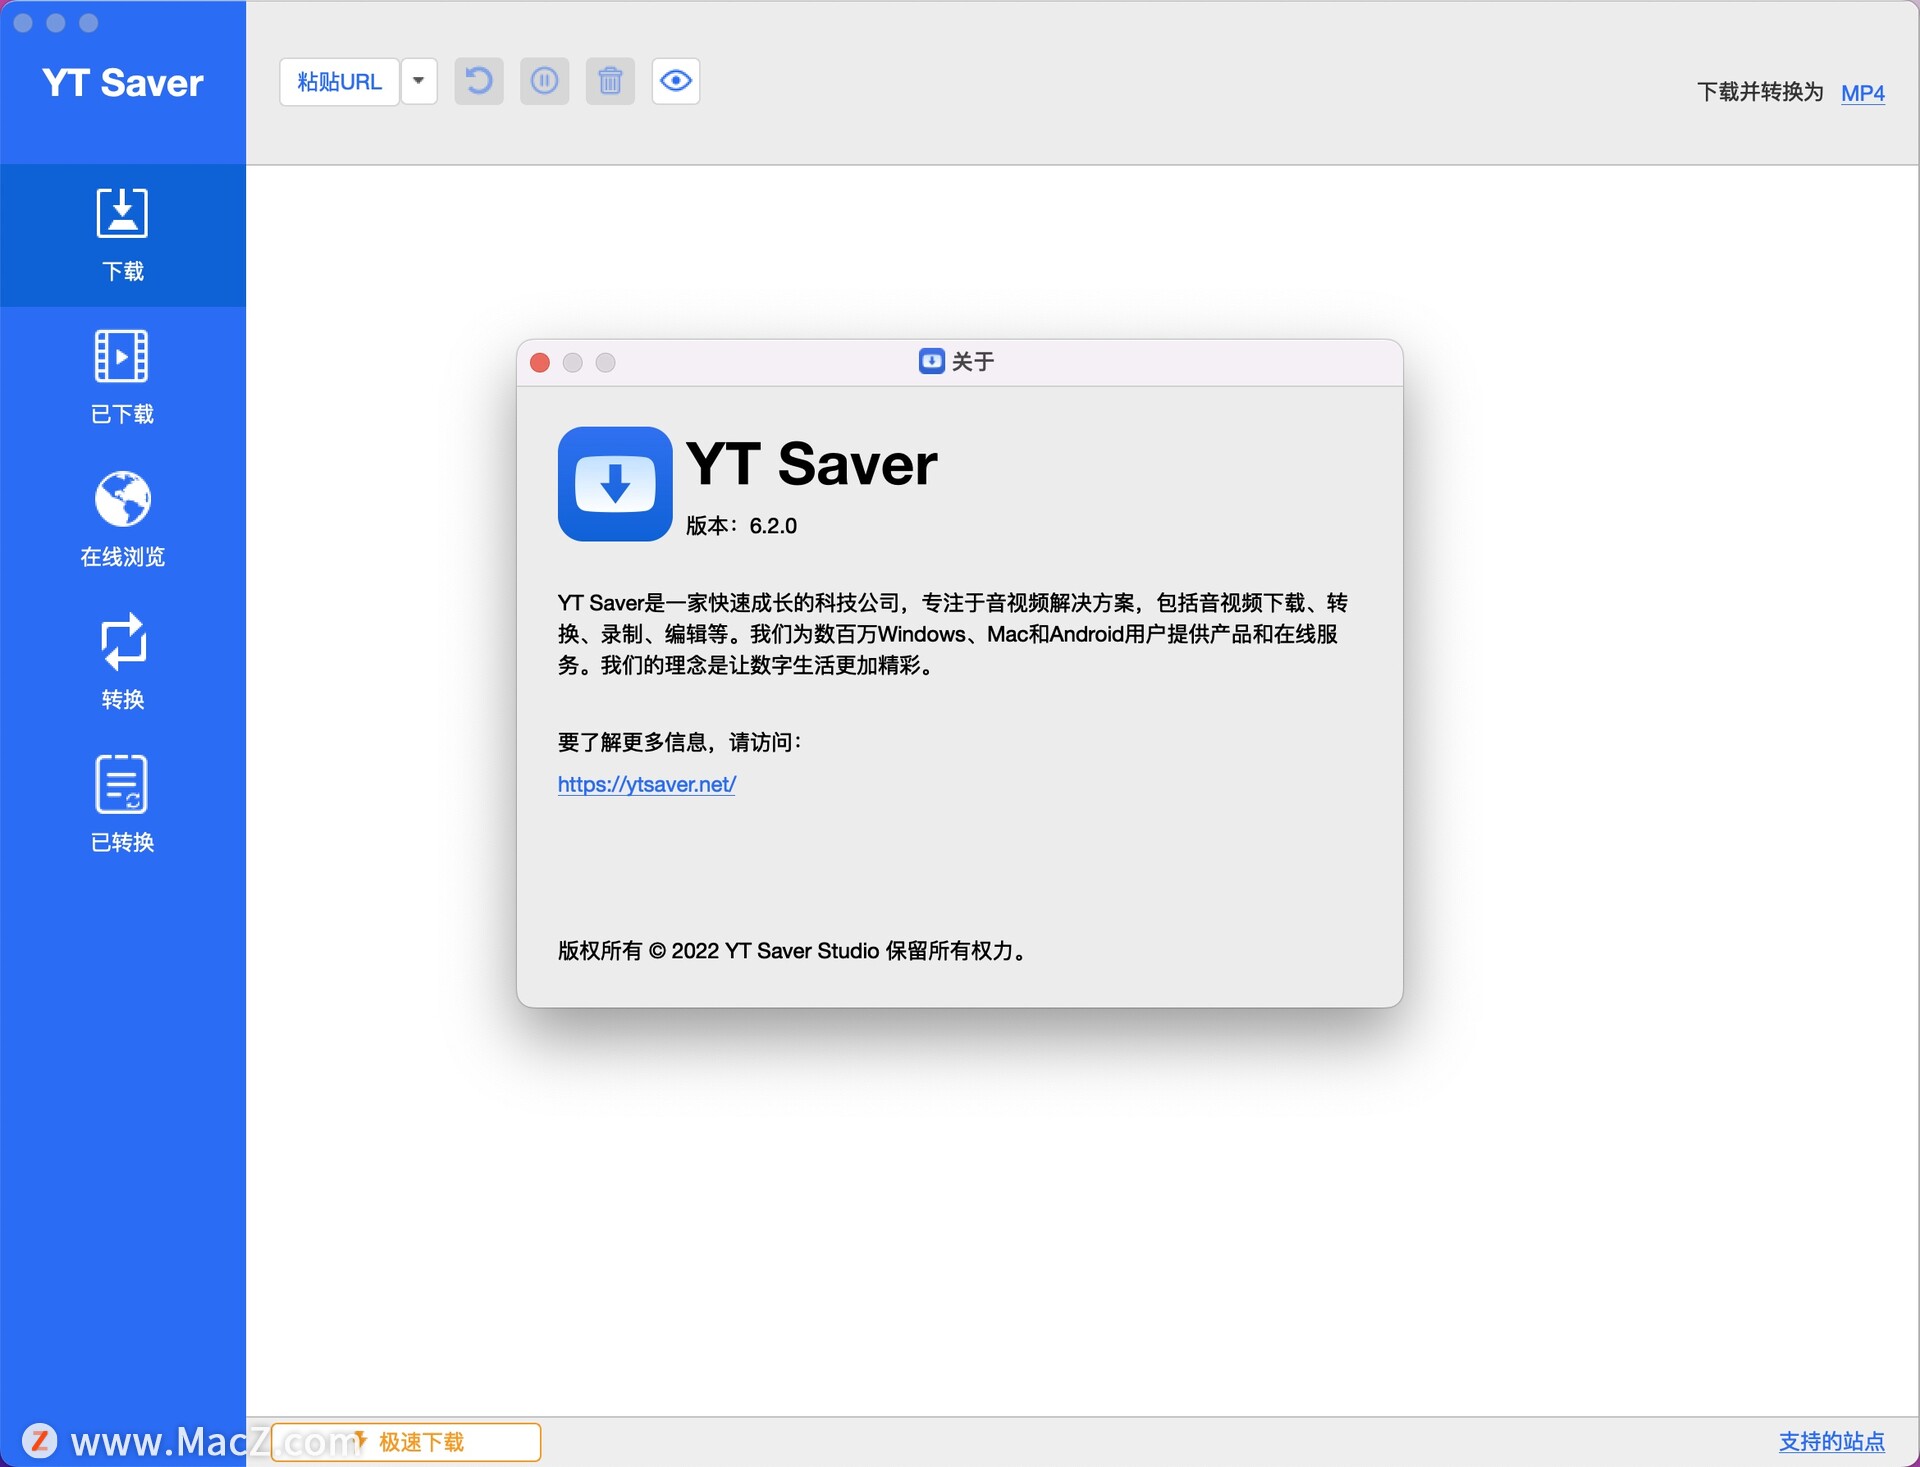 YT Saver 7.0.1 for ios download